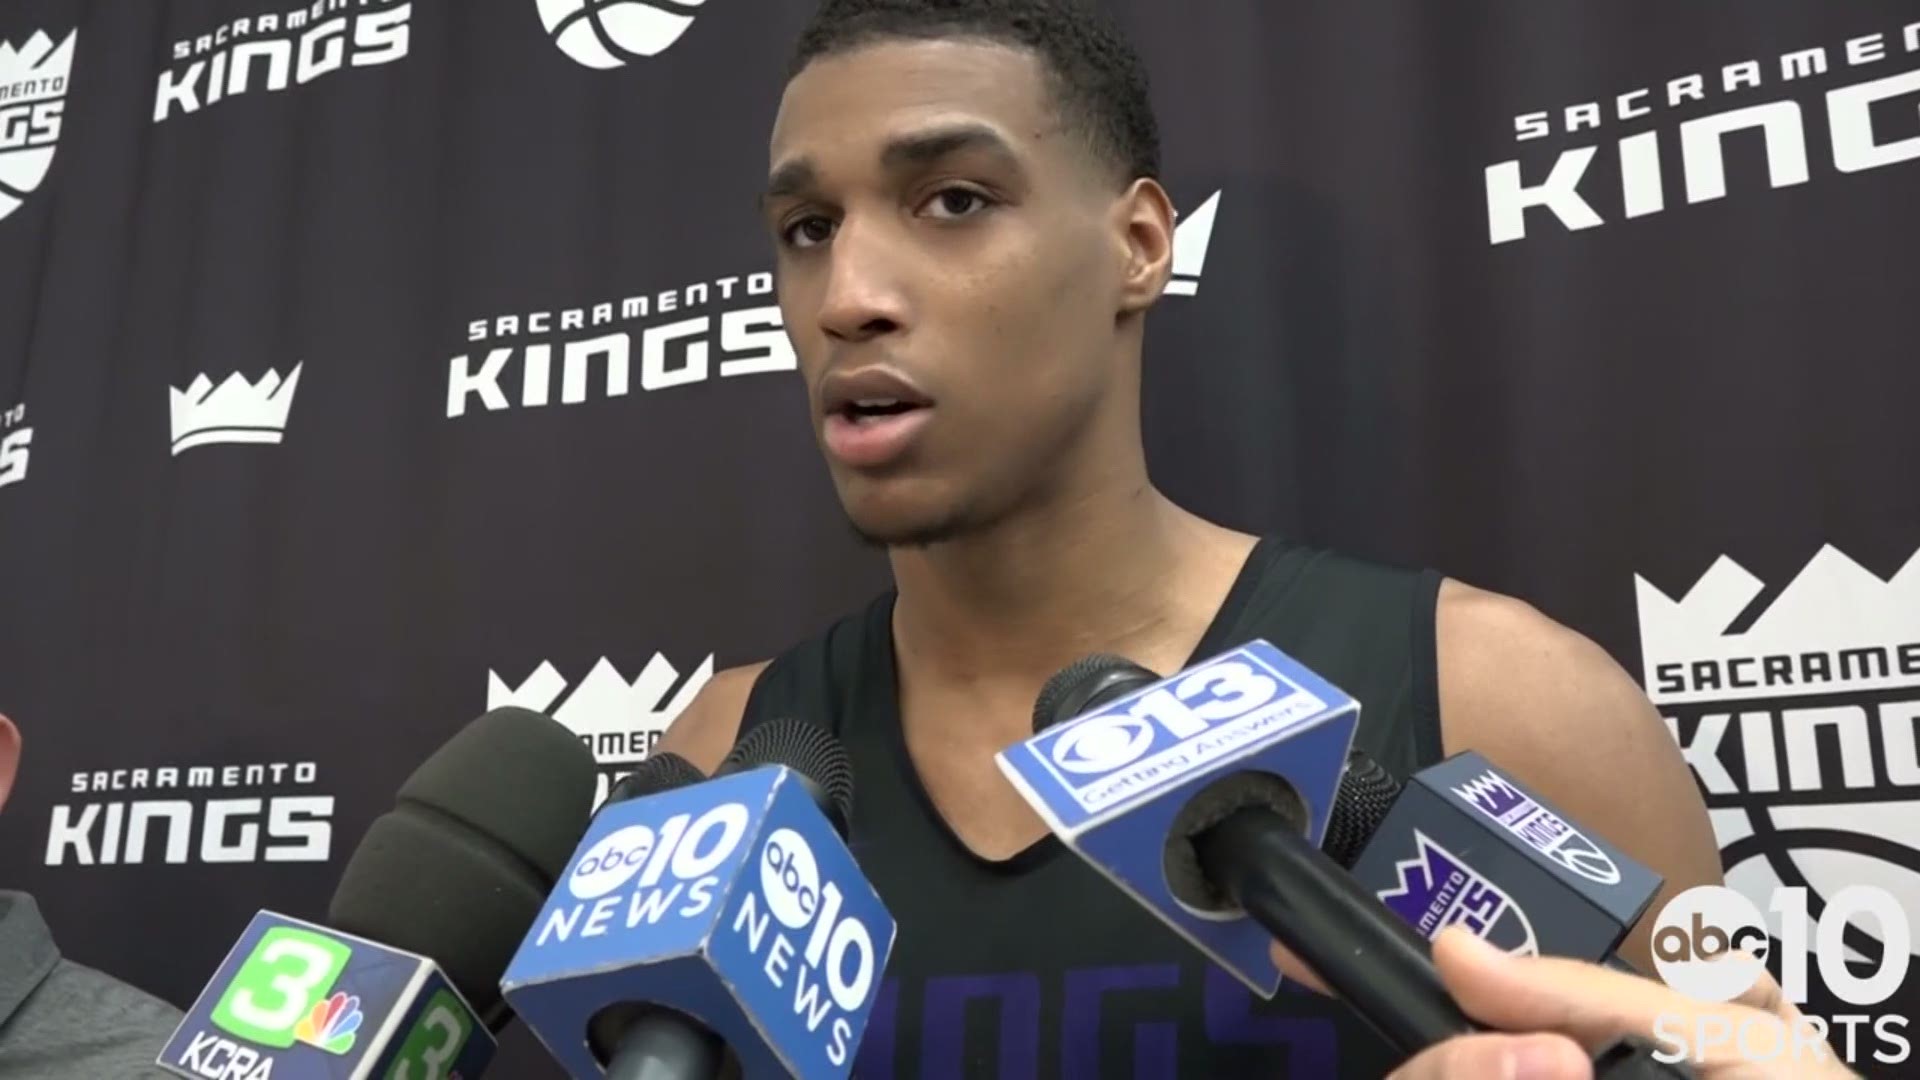 Manteca native and Oregon Ducks forward Kenny Wooten talks about his pre-draft workout in Sacramento with the Kings on Monday, auditioning for a team so close to home and making the leap from college to the the NBA.